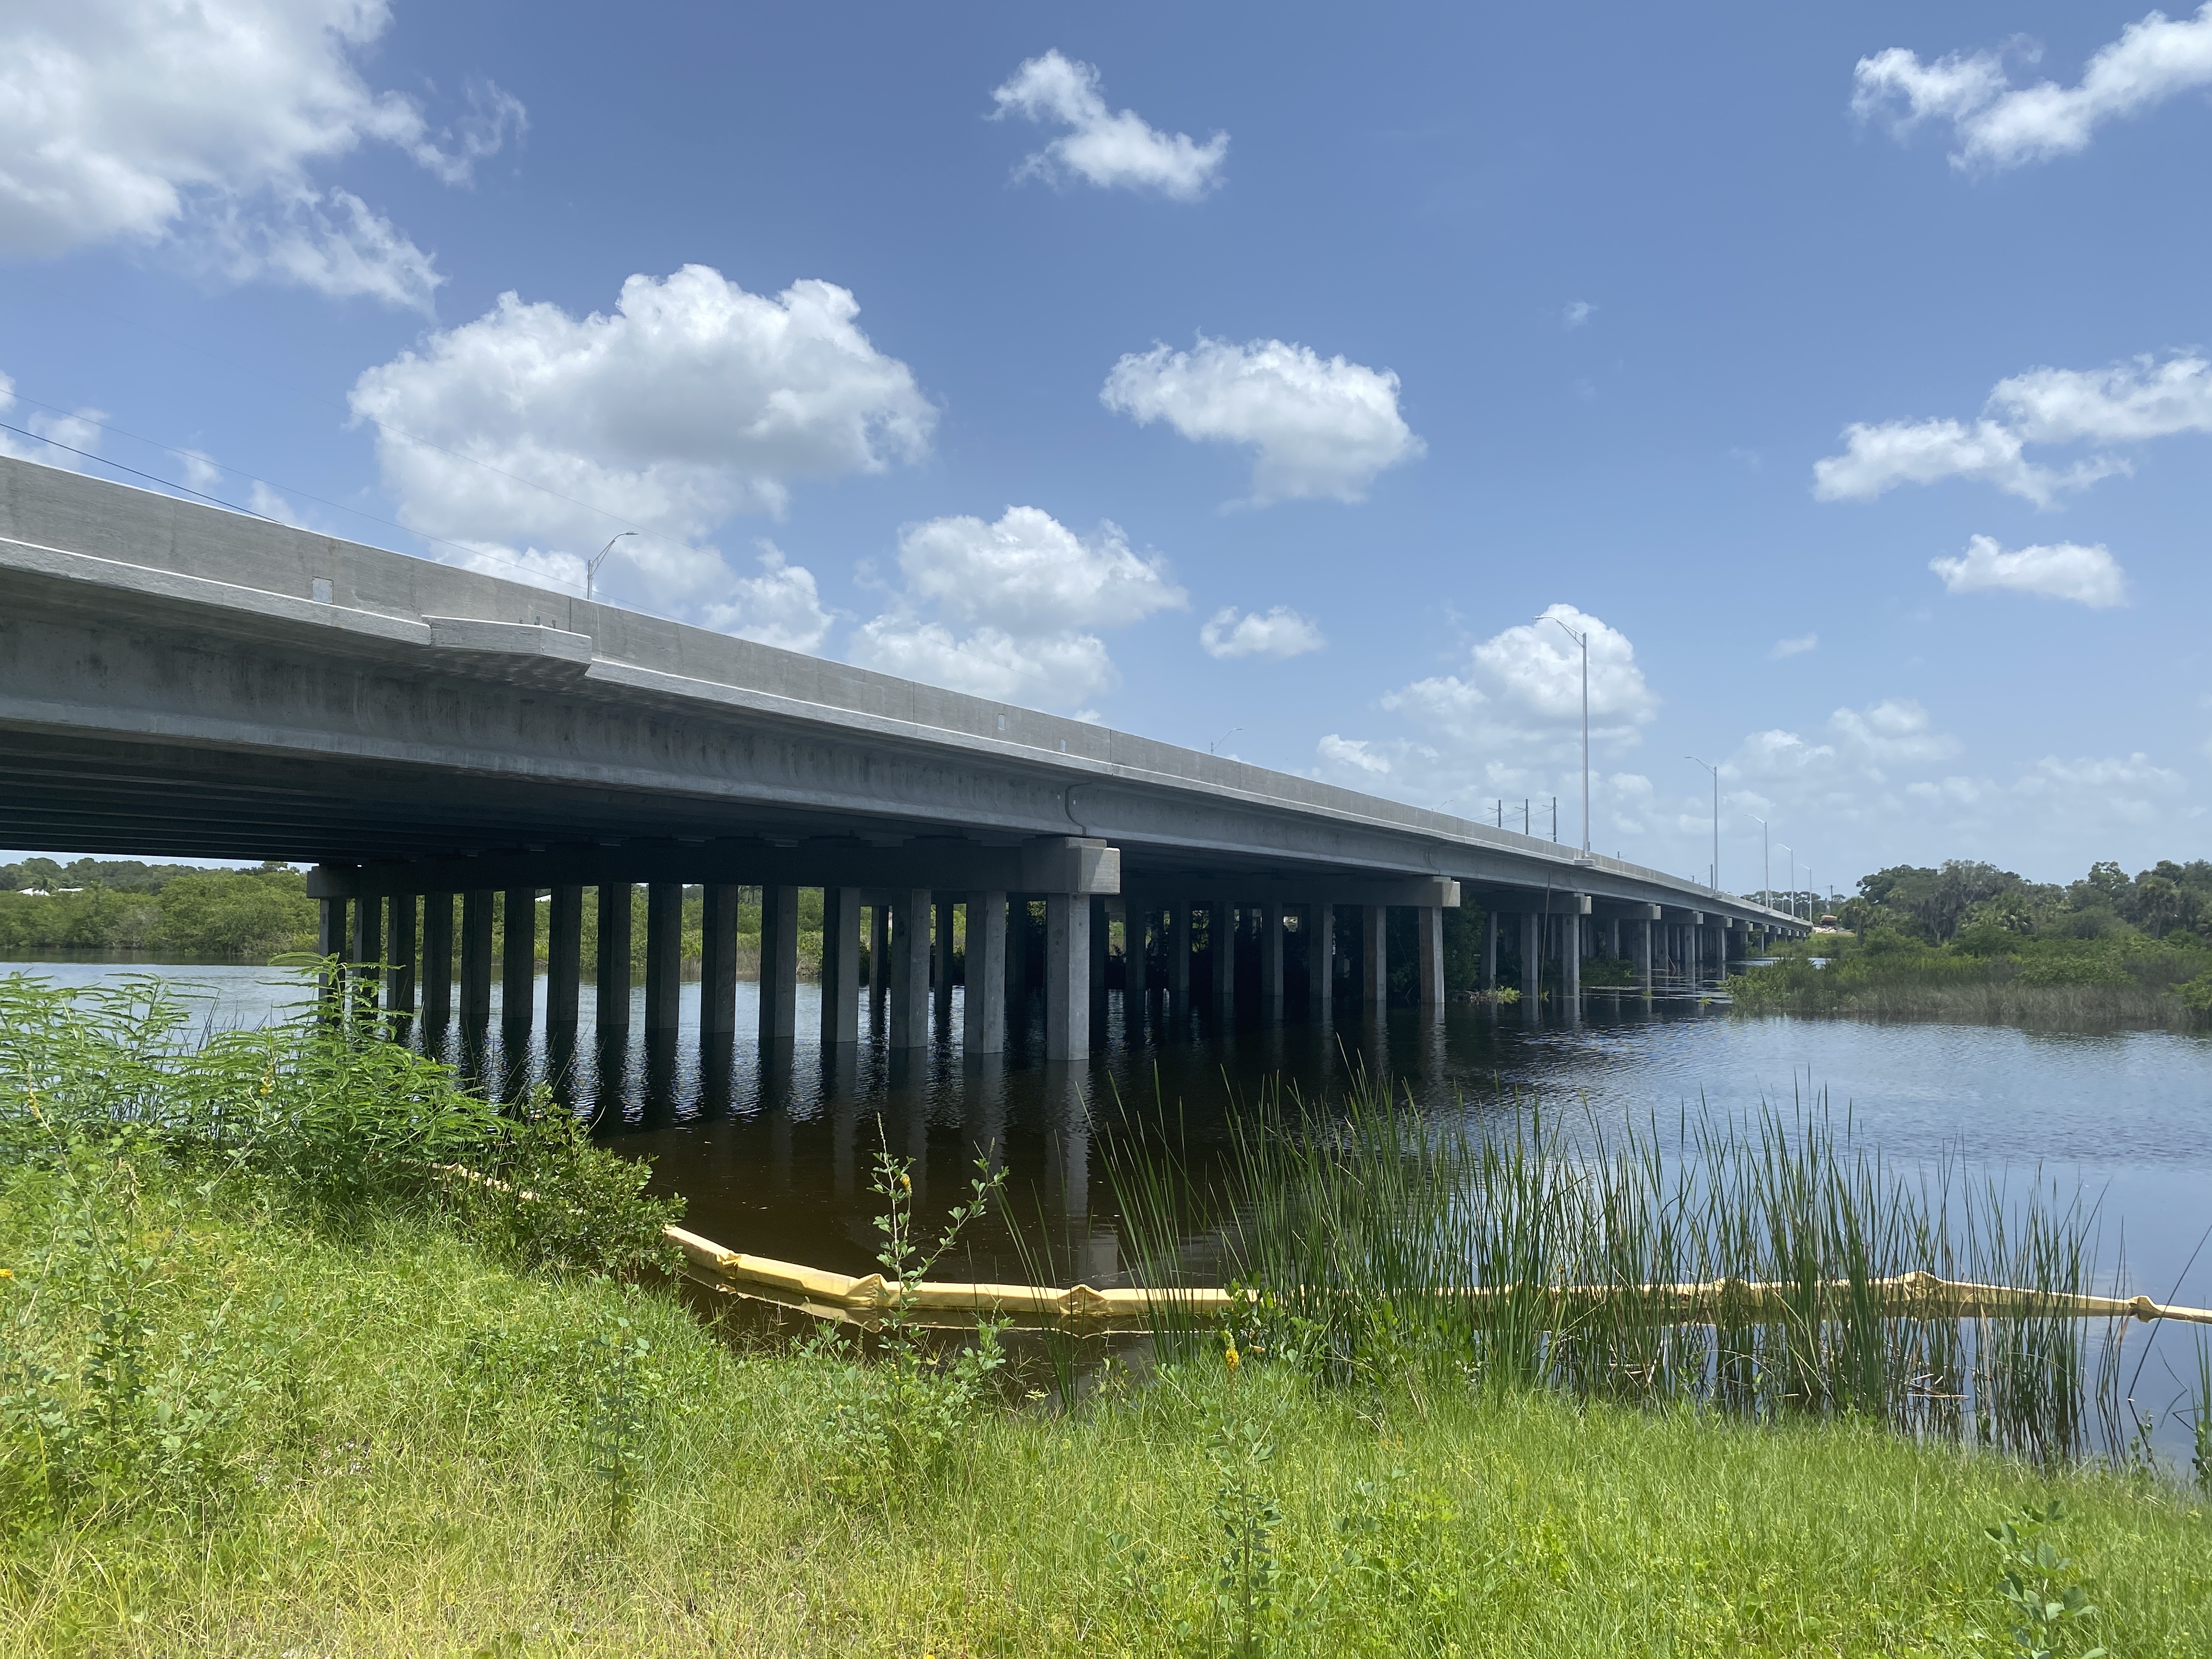 A view of the 44th Avenue Bridge from the western riverbank